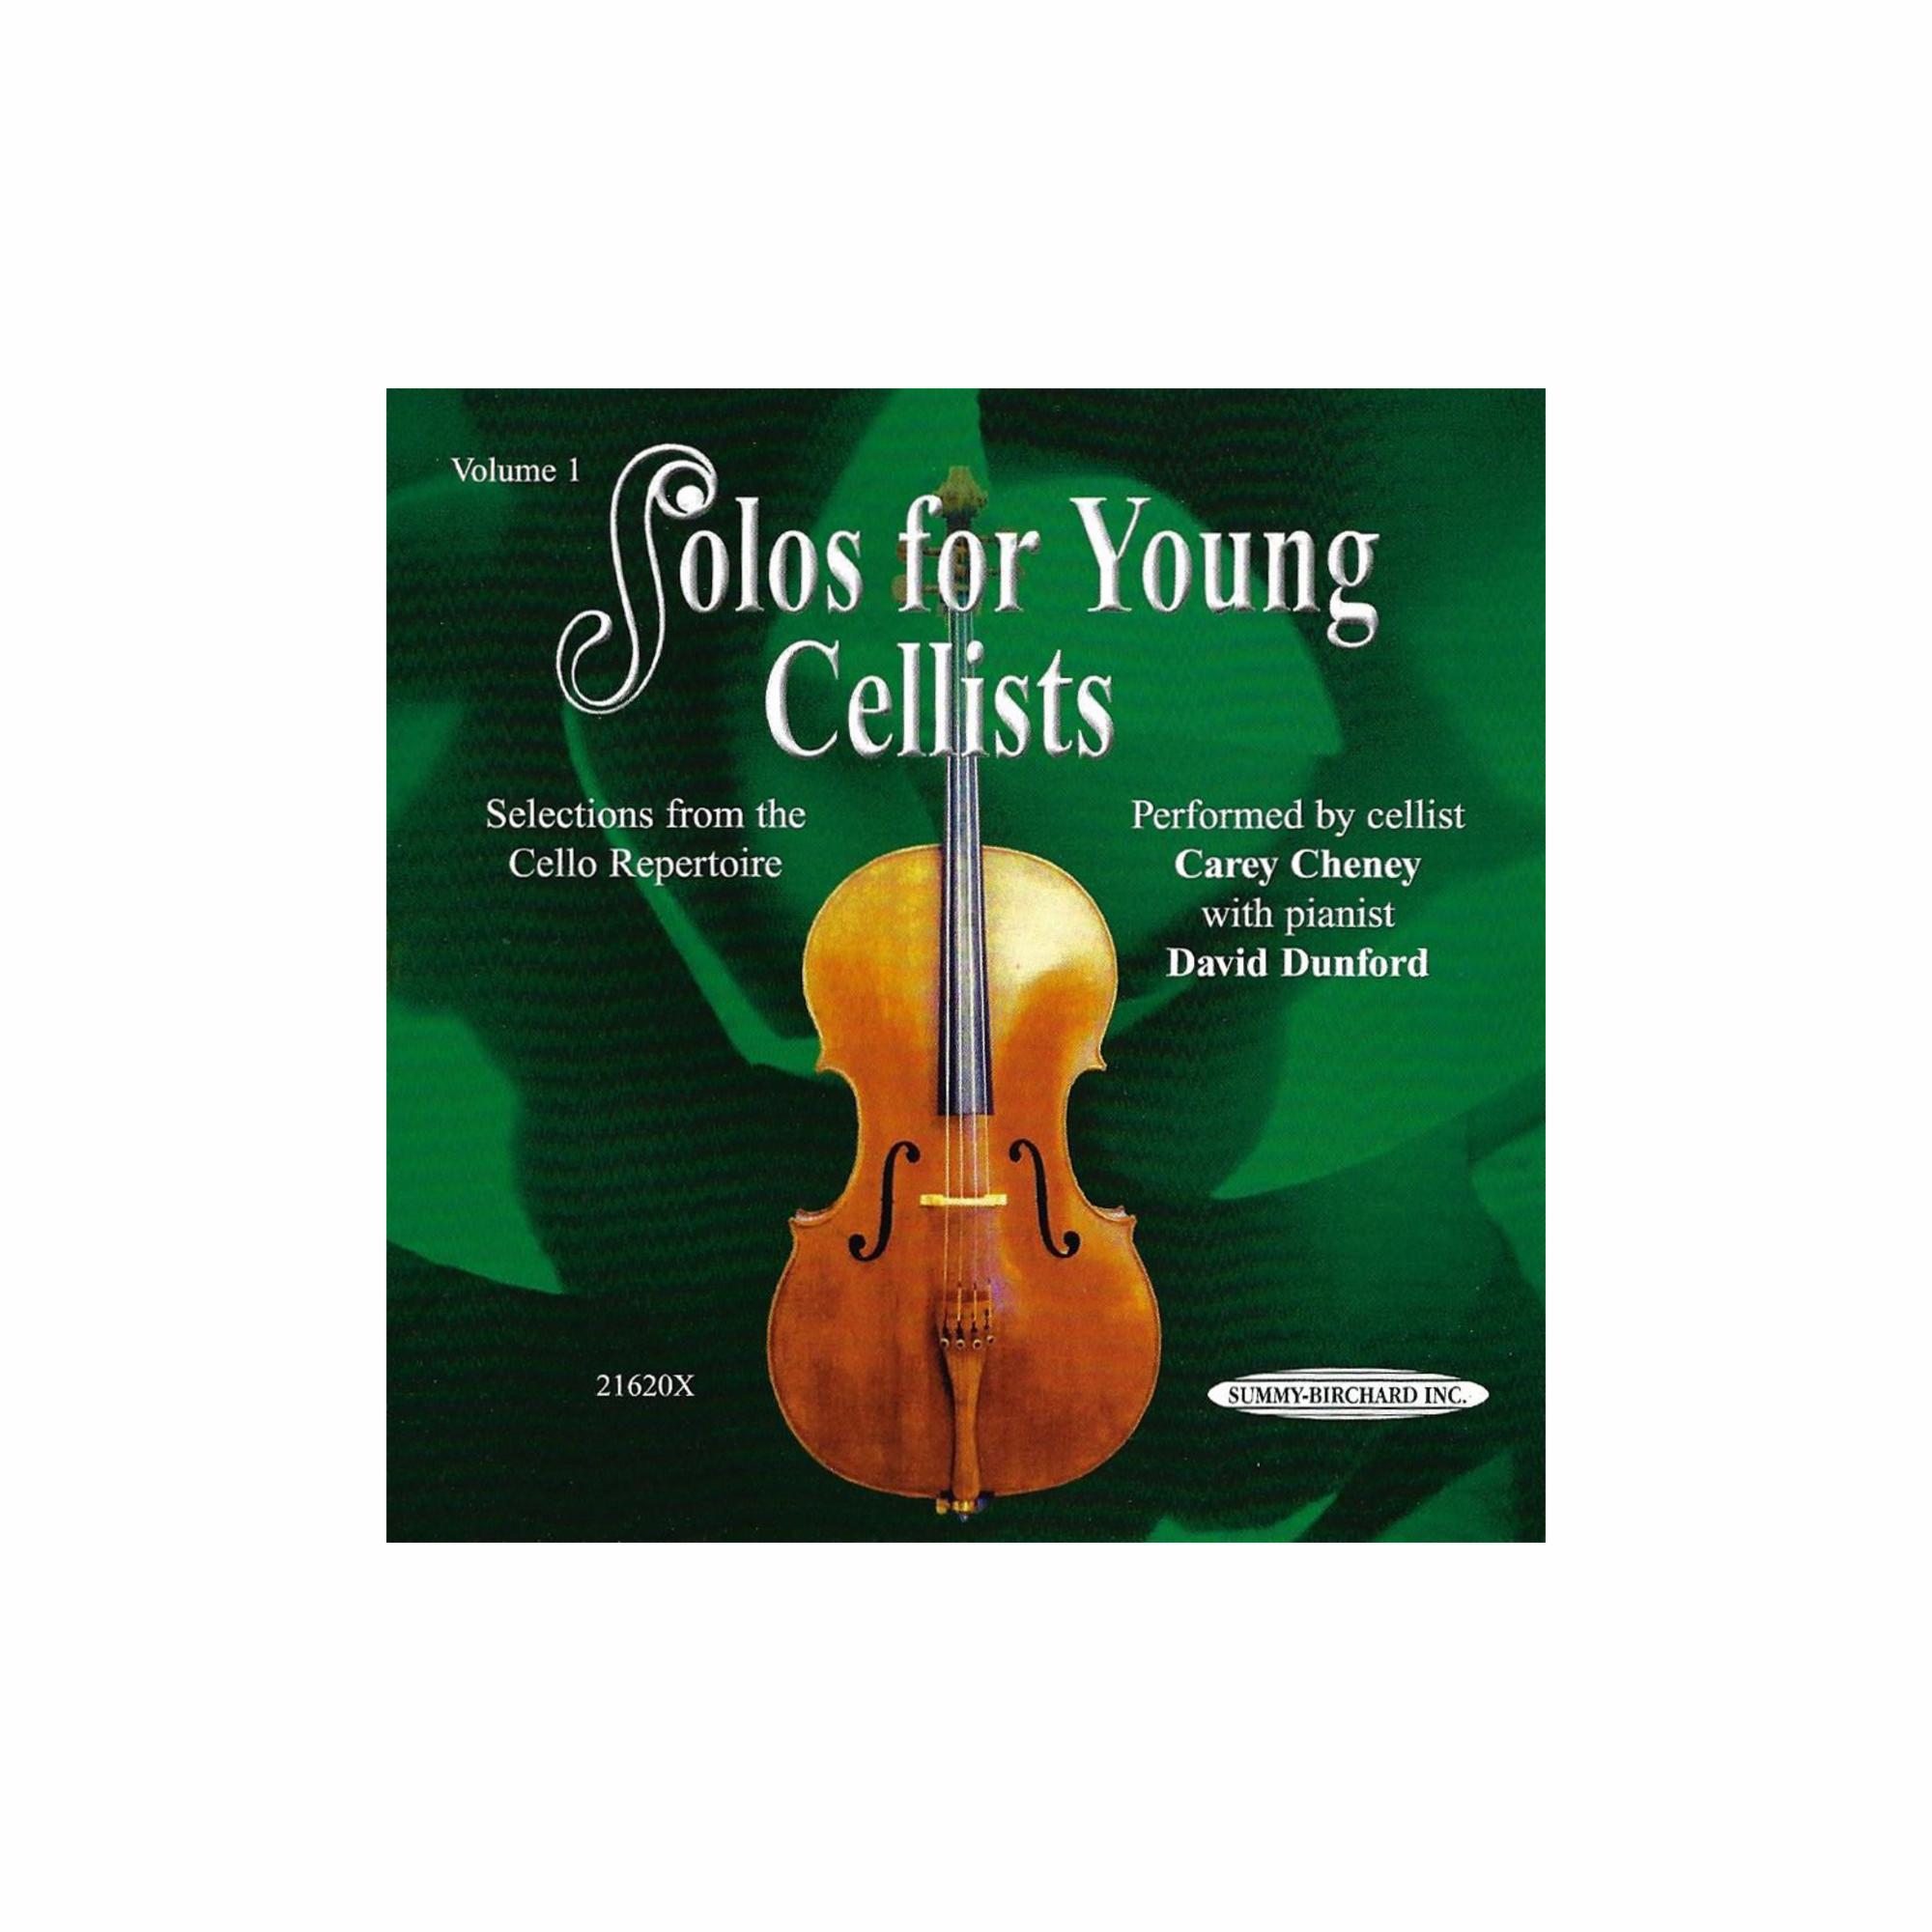 Solos for Young Cellists: CD's